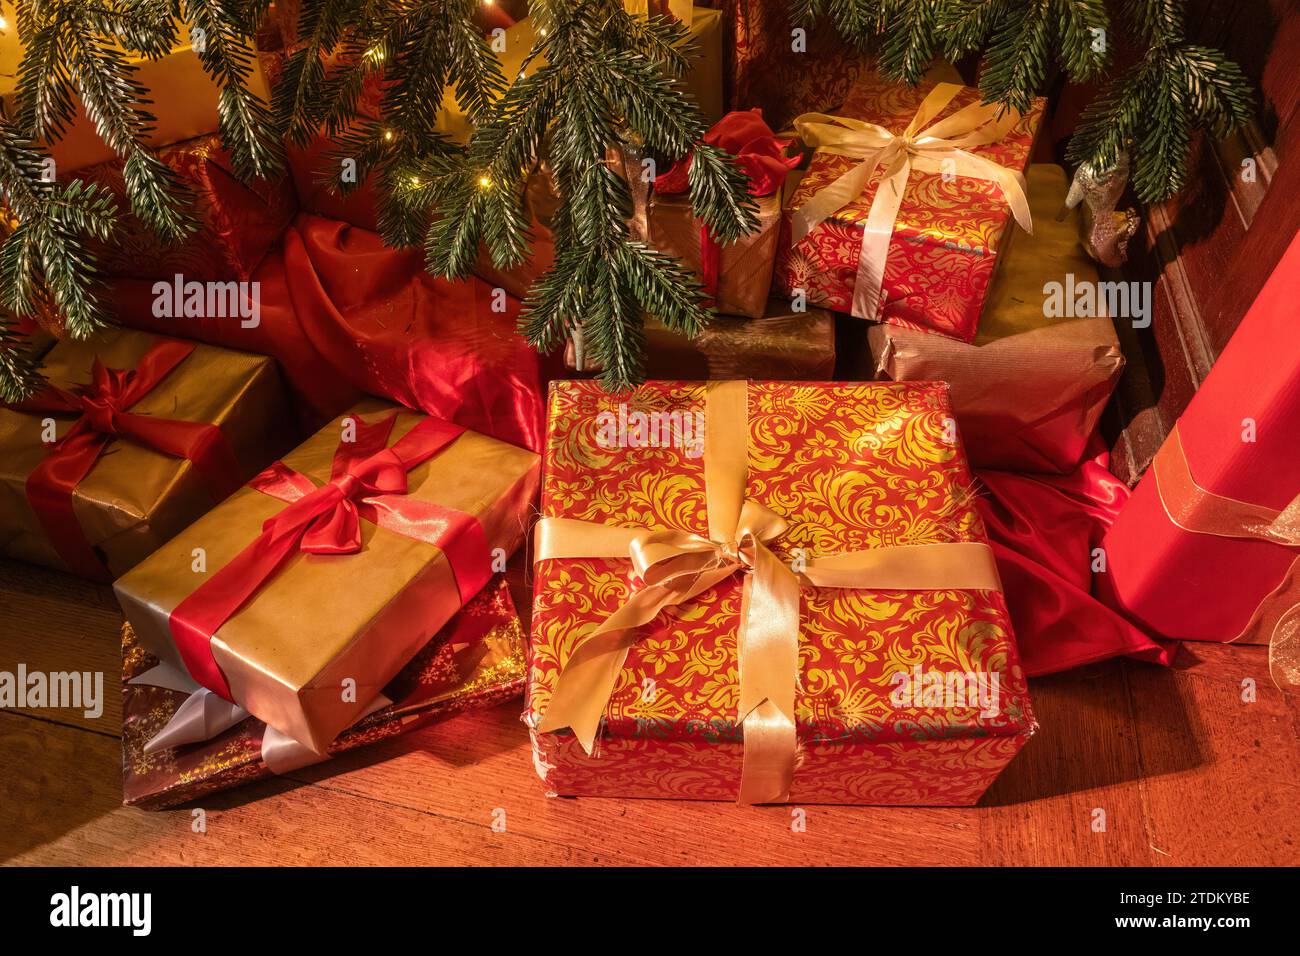 Christmas presents or gifts under the Christmas tree wrapped in colourful wrapping paper with ribbons Stock Photo